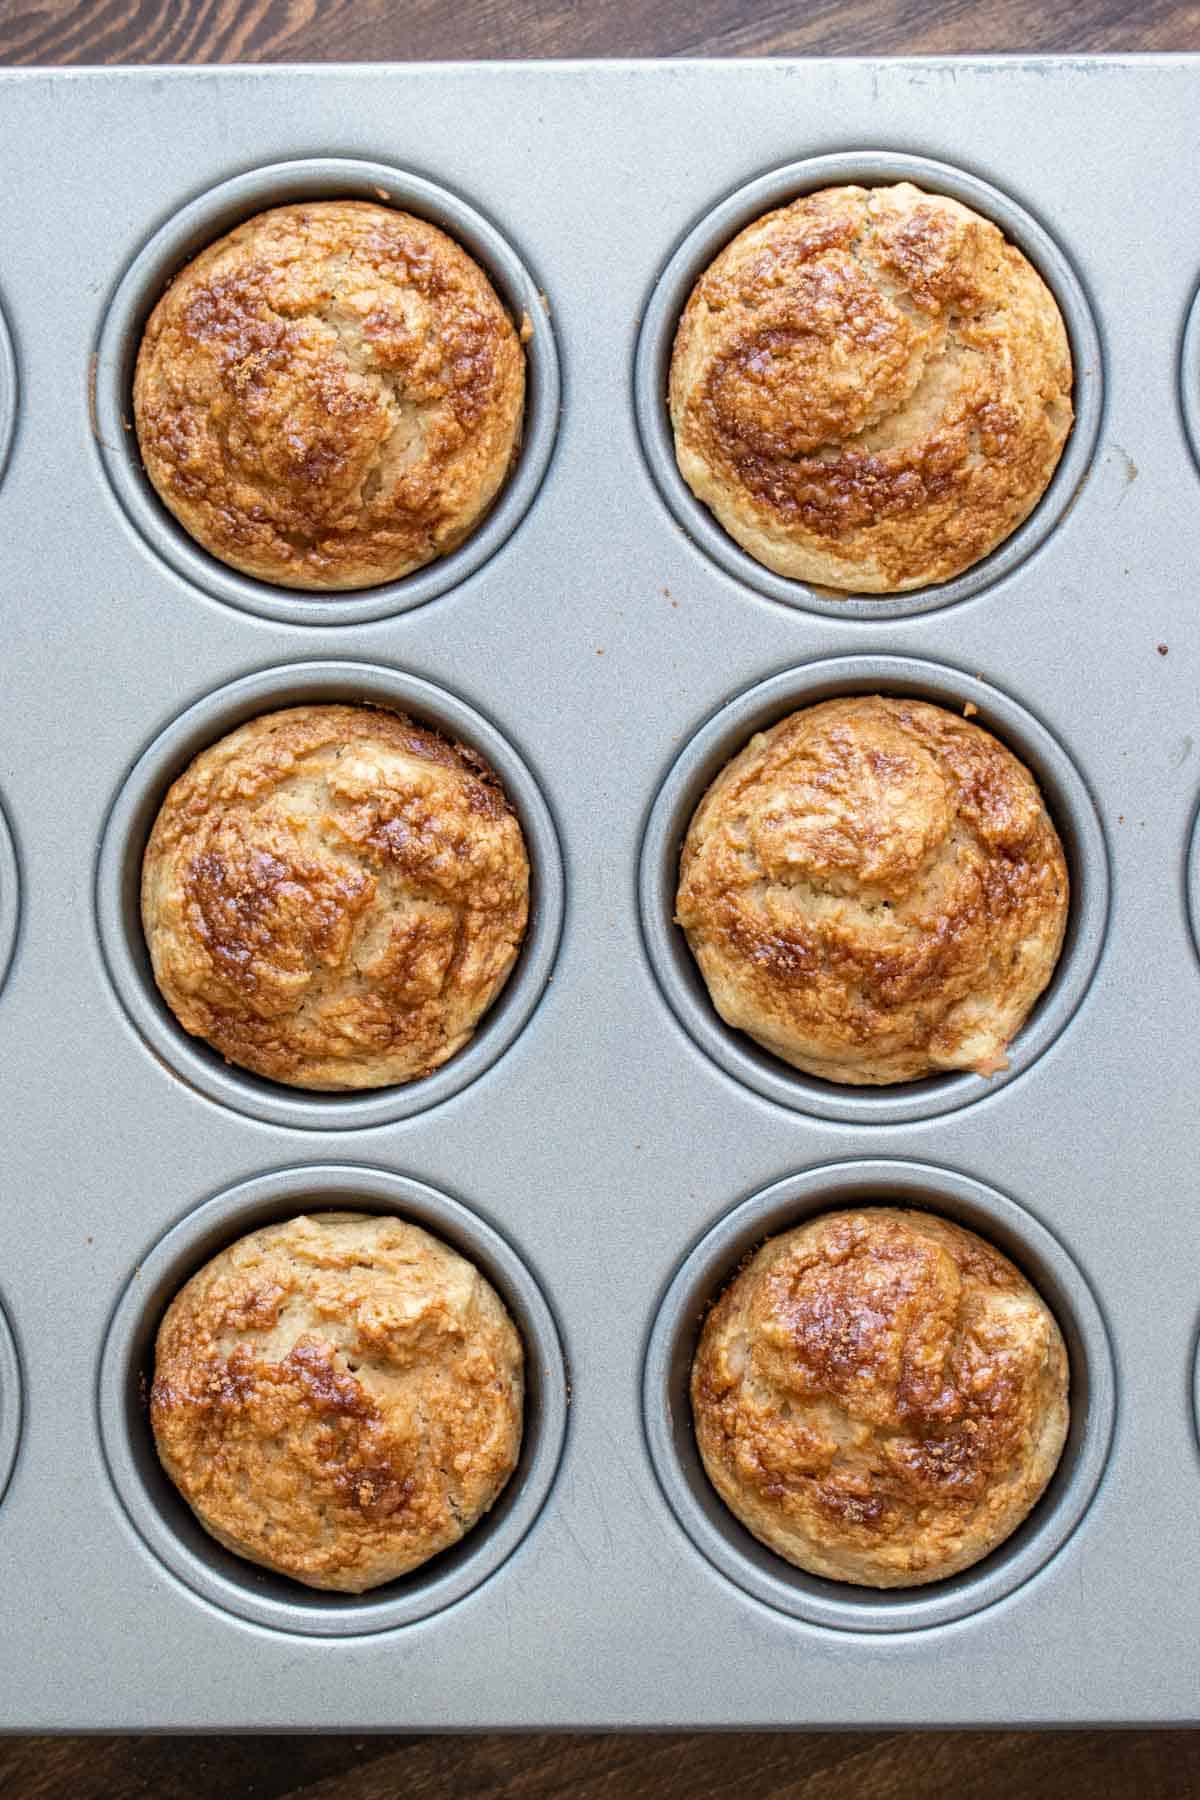 Top view of baked muffins in a muffin tin